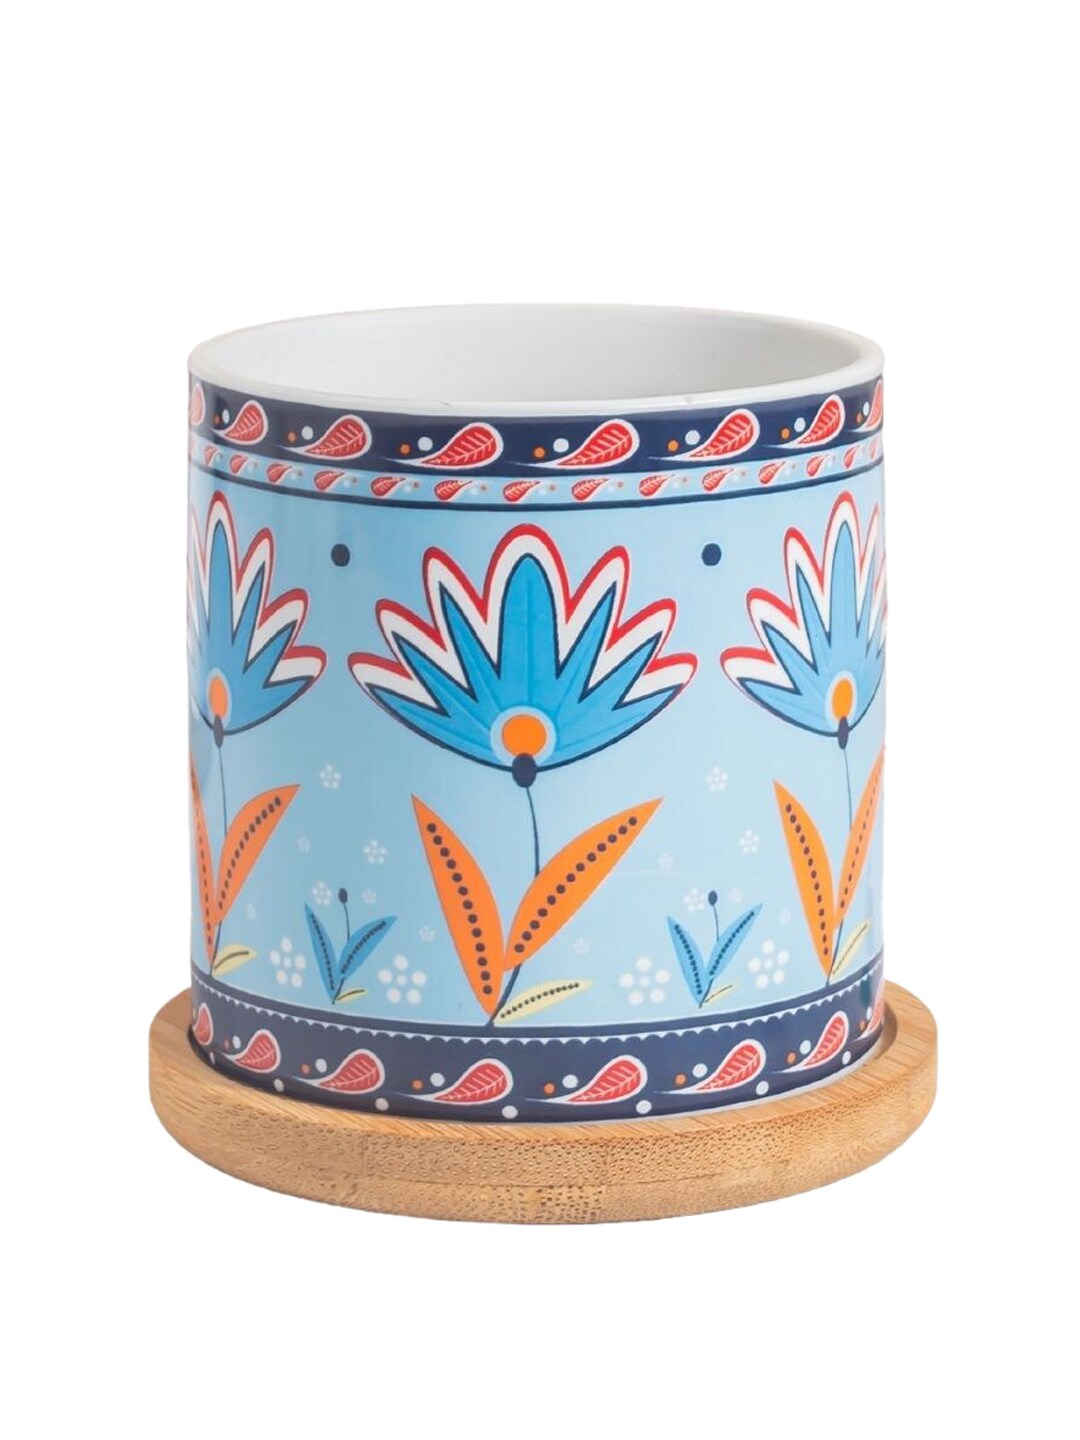 Nestasia Botanical Patterned Ceramic Planters With Wooden Coaster Price in India